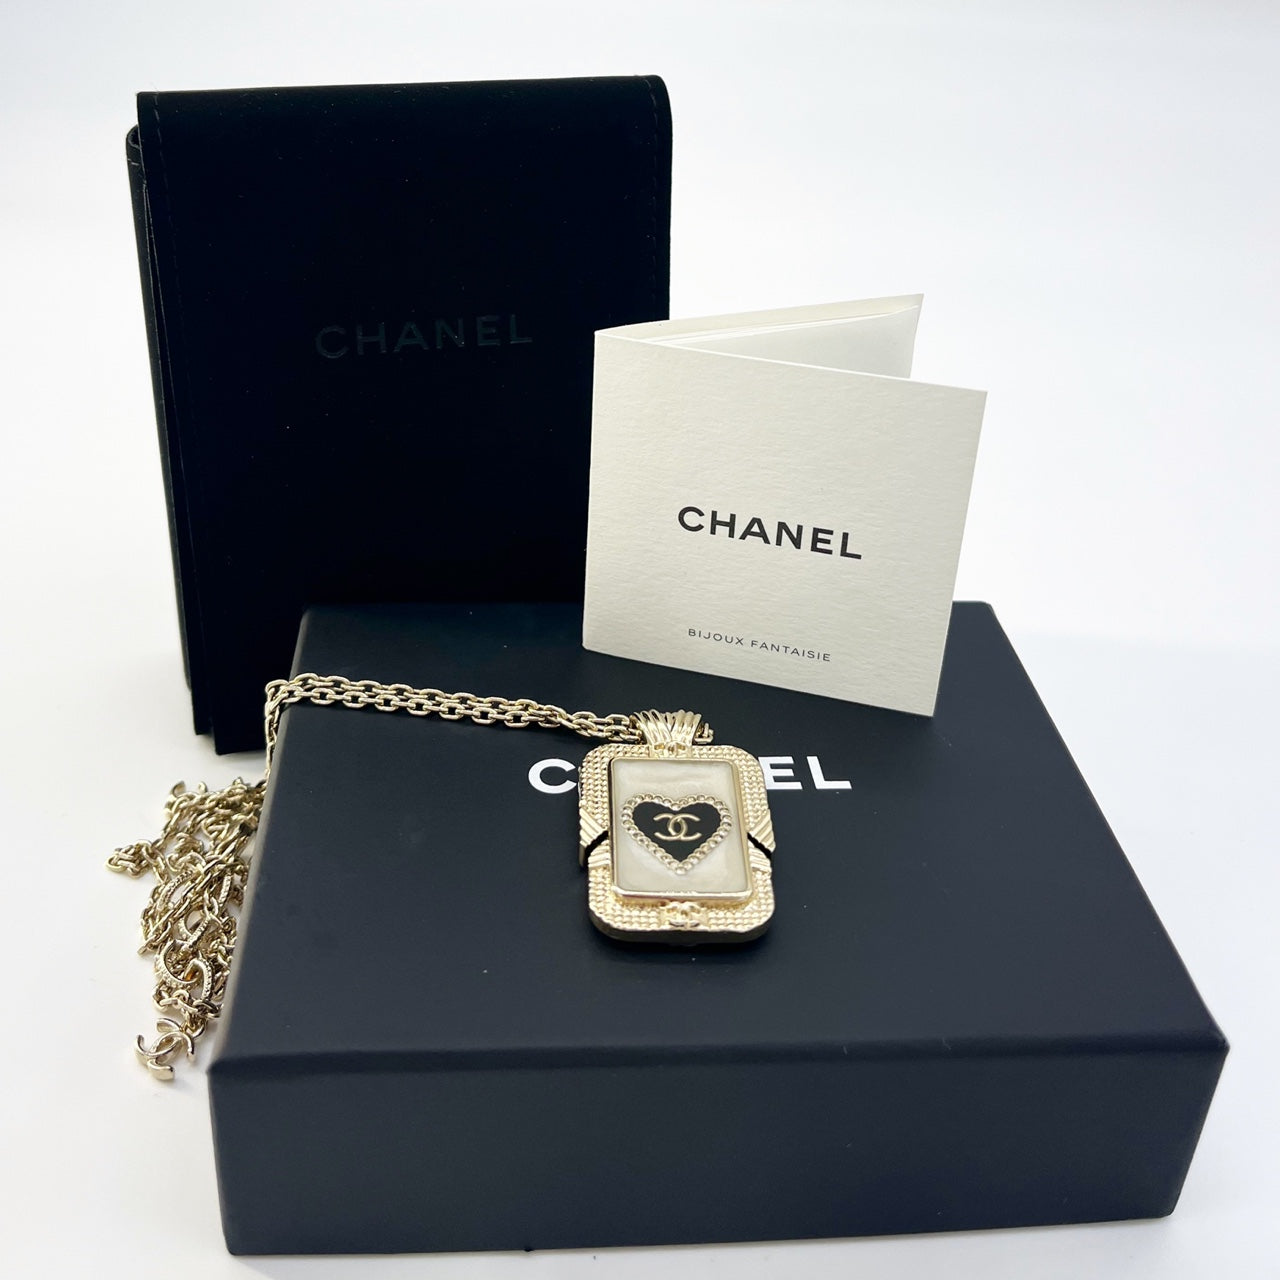 Guarantee Authentic Chanel Crystal No.5 Perfume Bottle Rectangle Pendant Reversible Gold tone necklace